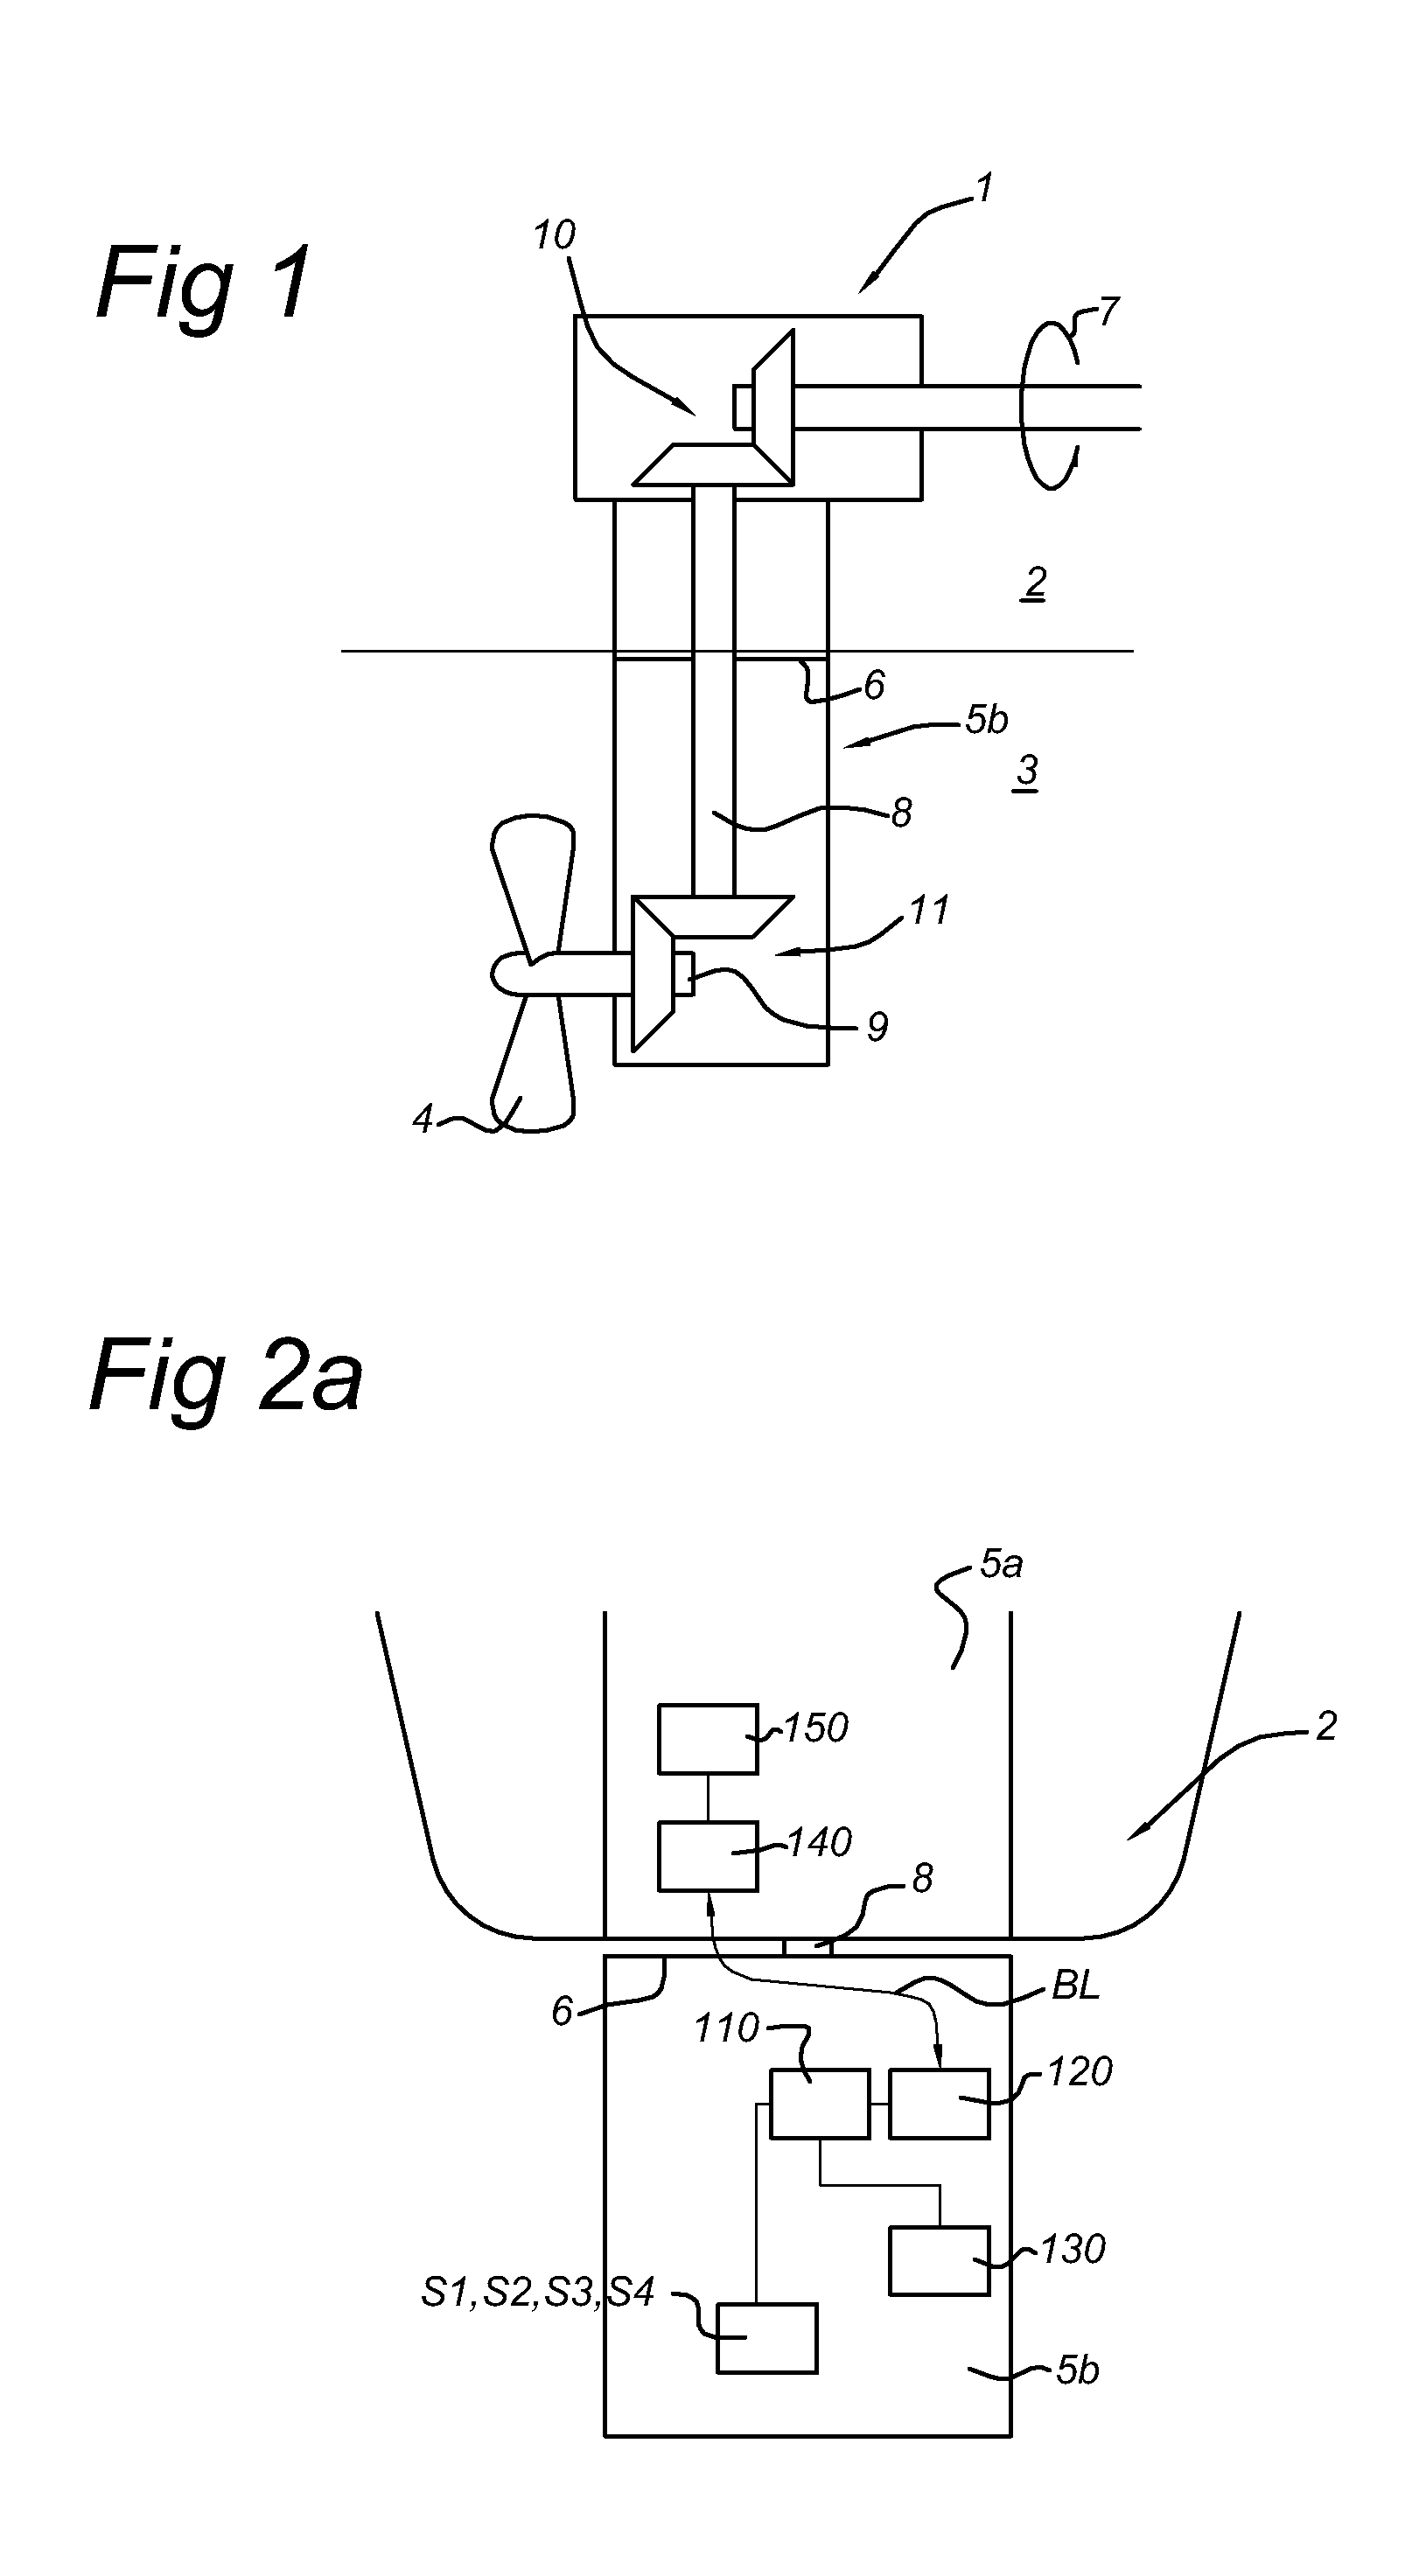 Telemetry system for ship propulsion systems